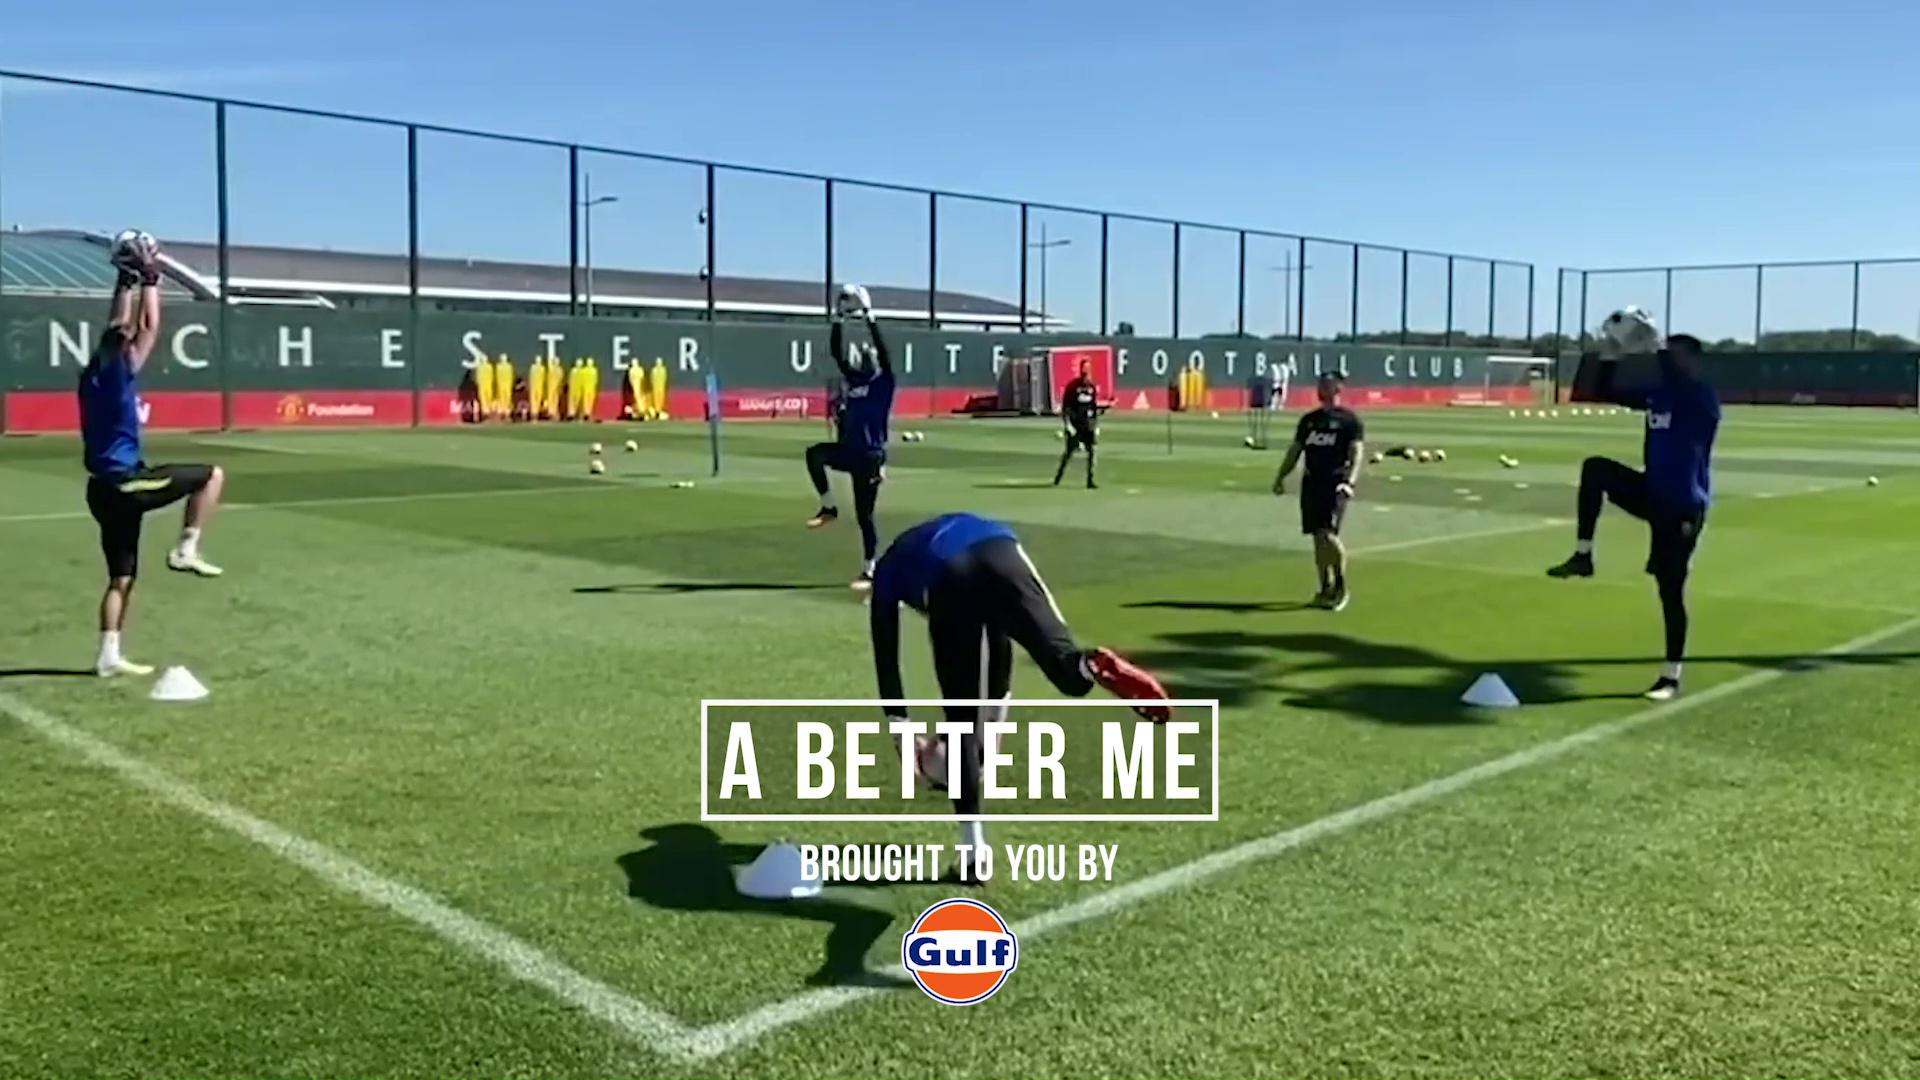 Gulf Oil A Better Me Episode 4 | Manchester United